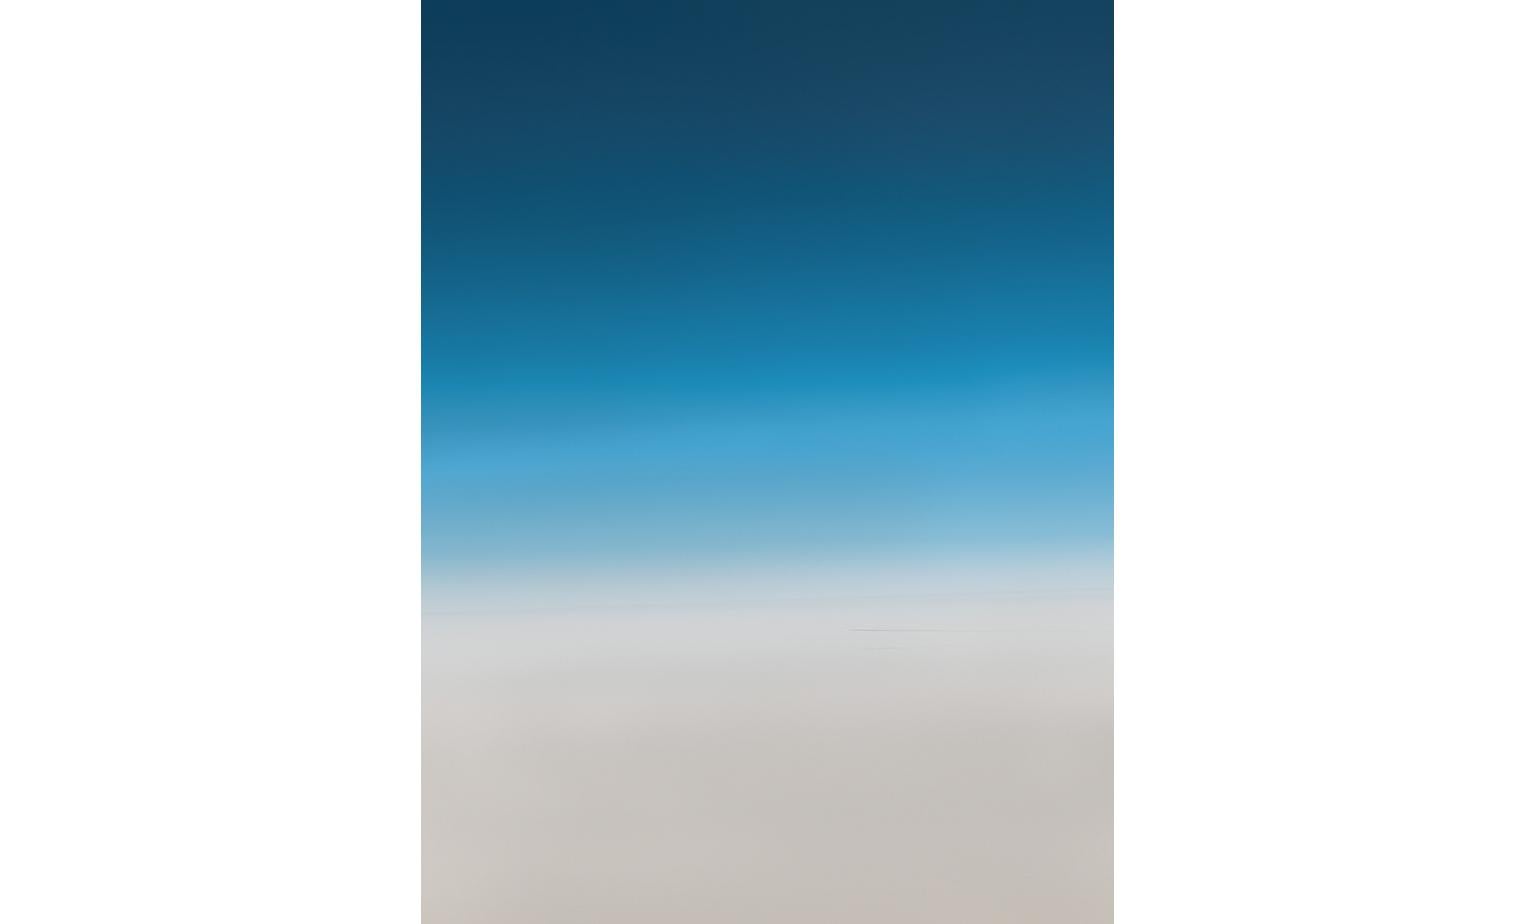 Sky ( artist framed ) - large scale abstract gradient monochromatic photograph - Photograph by Raymond Meier